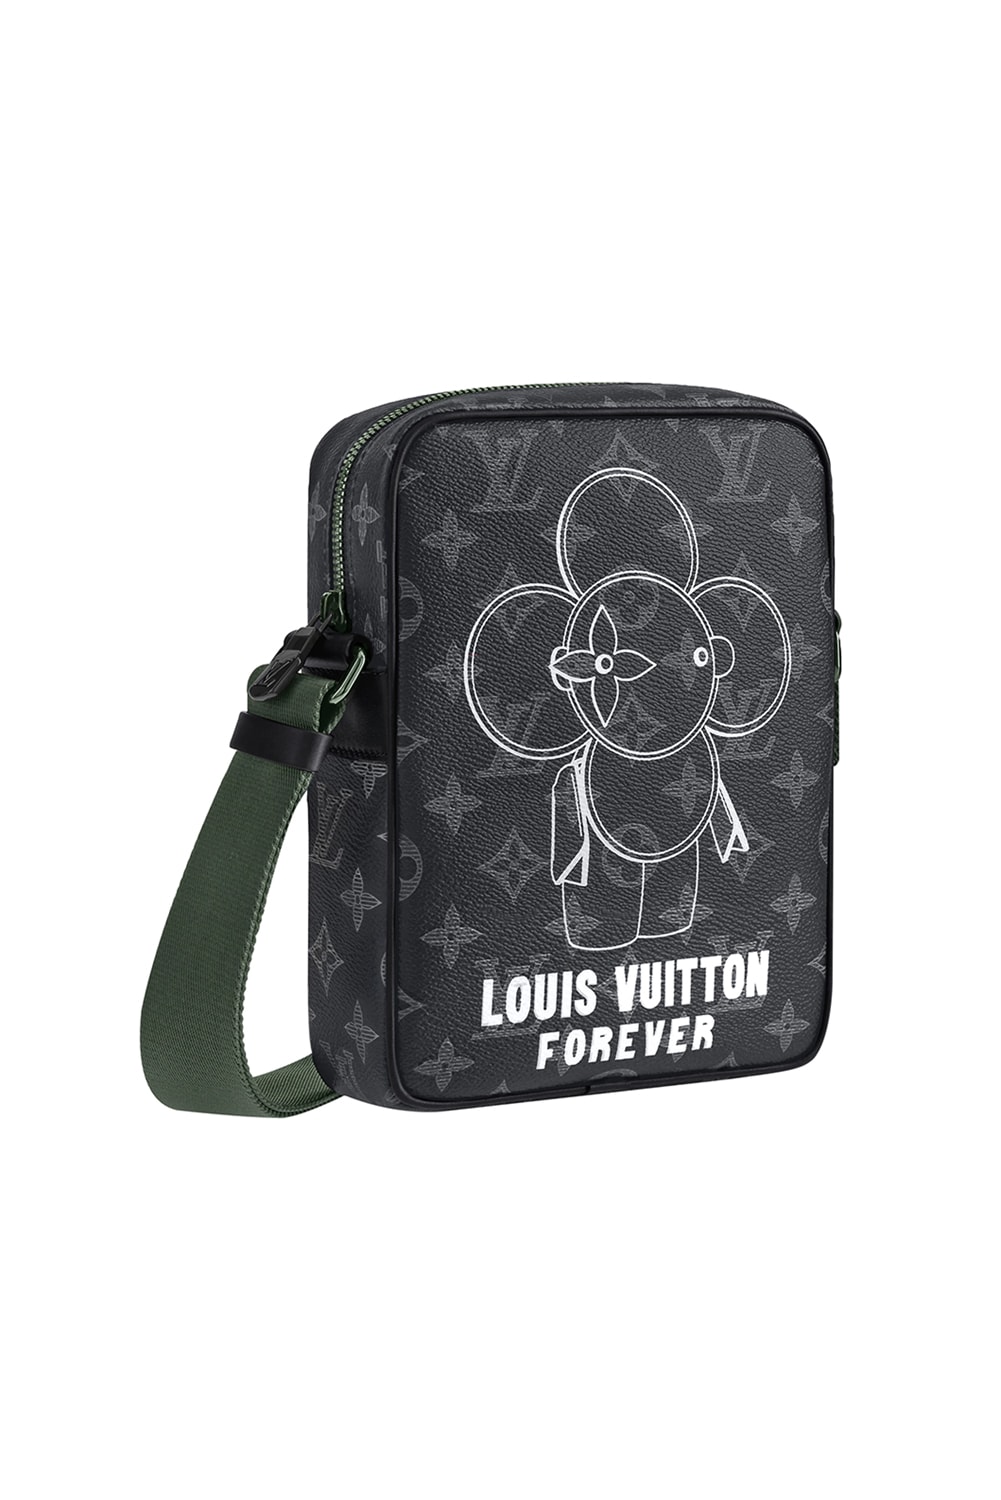 Louis Vuitton "Monogram Vivienne Eclipse" Pre-Fall/Winter 2018 Exclusive Collection White Black Blue Yellow T-Shirt Side Overall Duffle Bag Backpack Watch